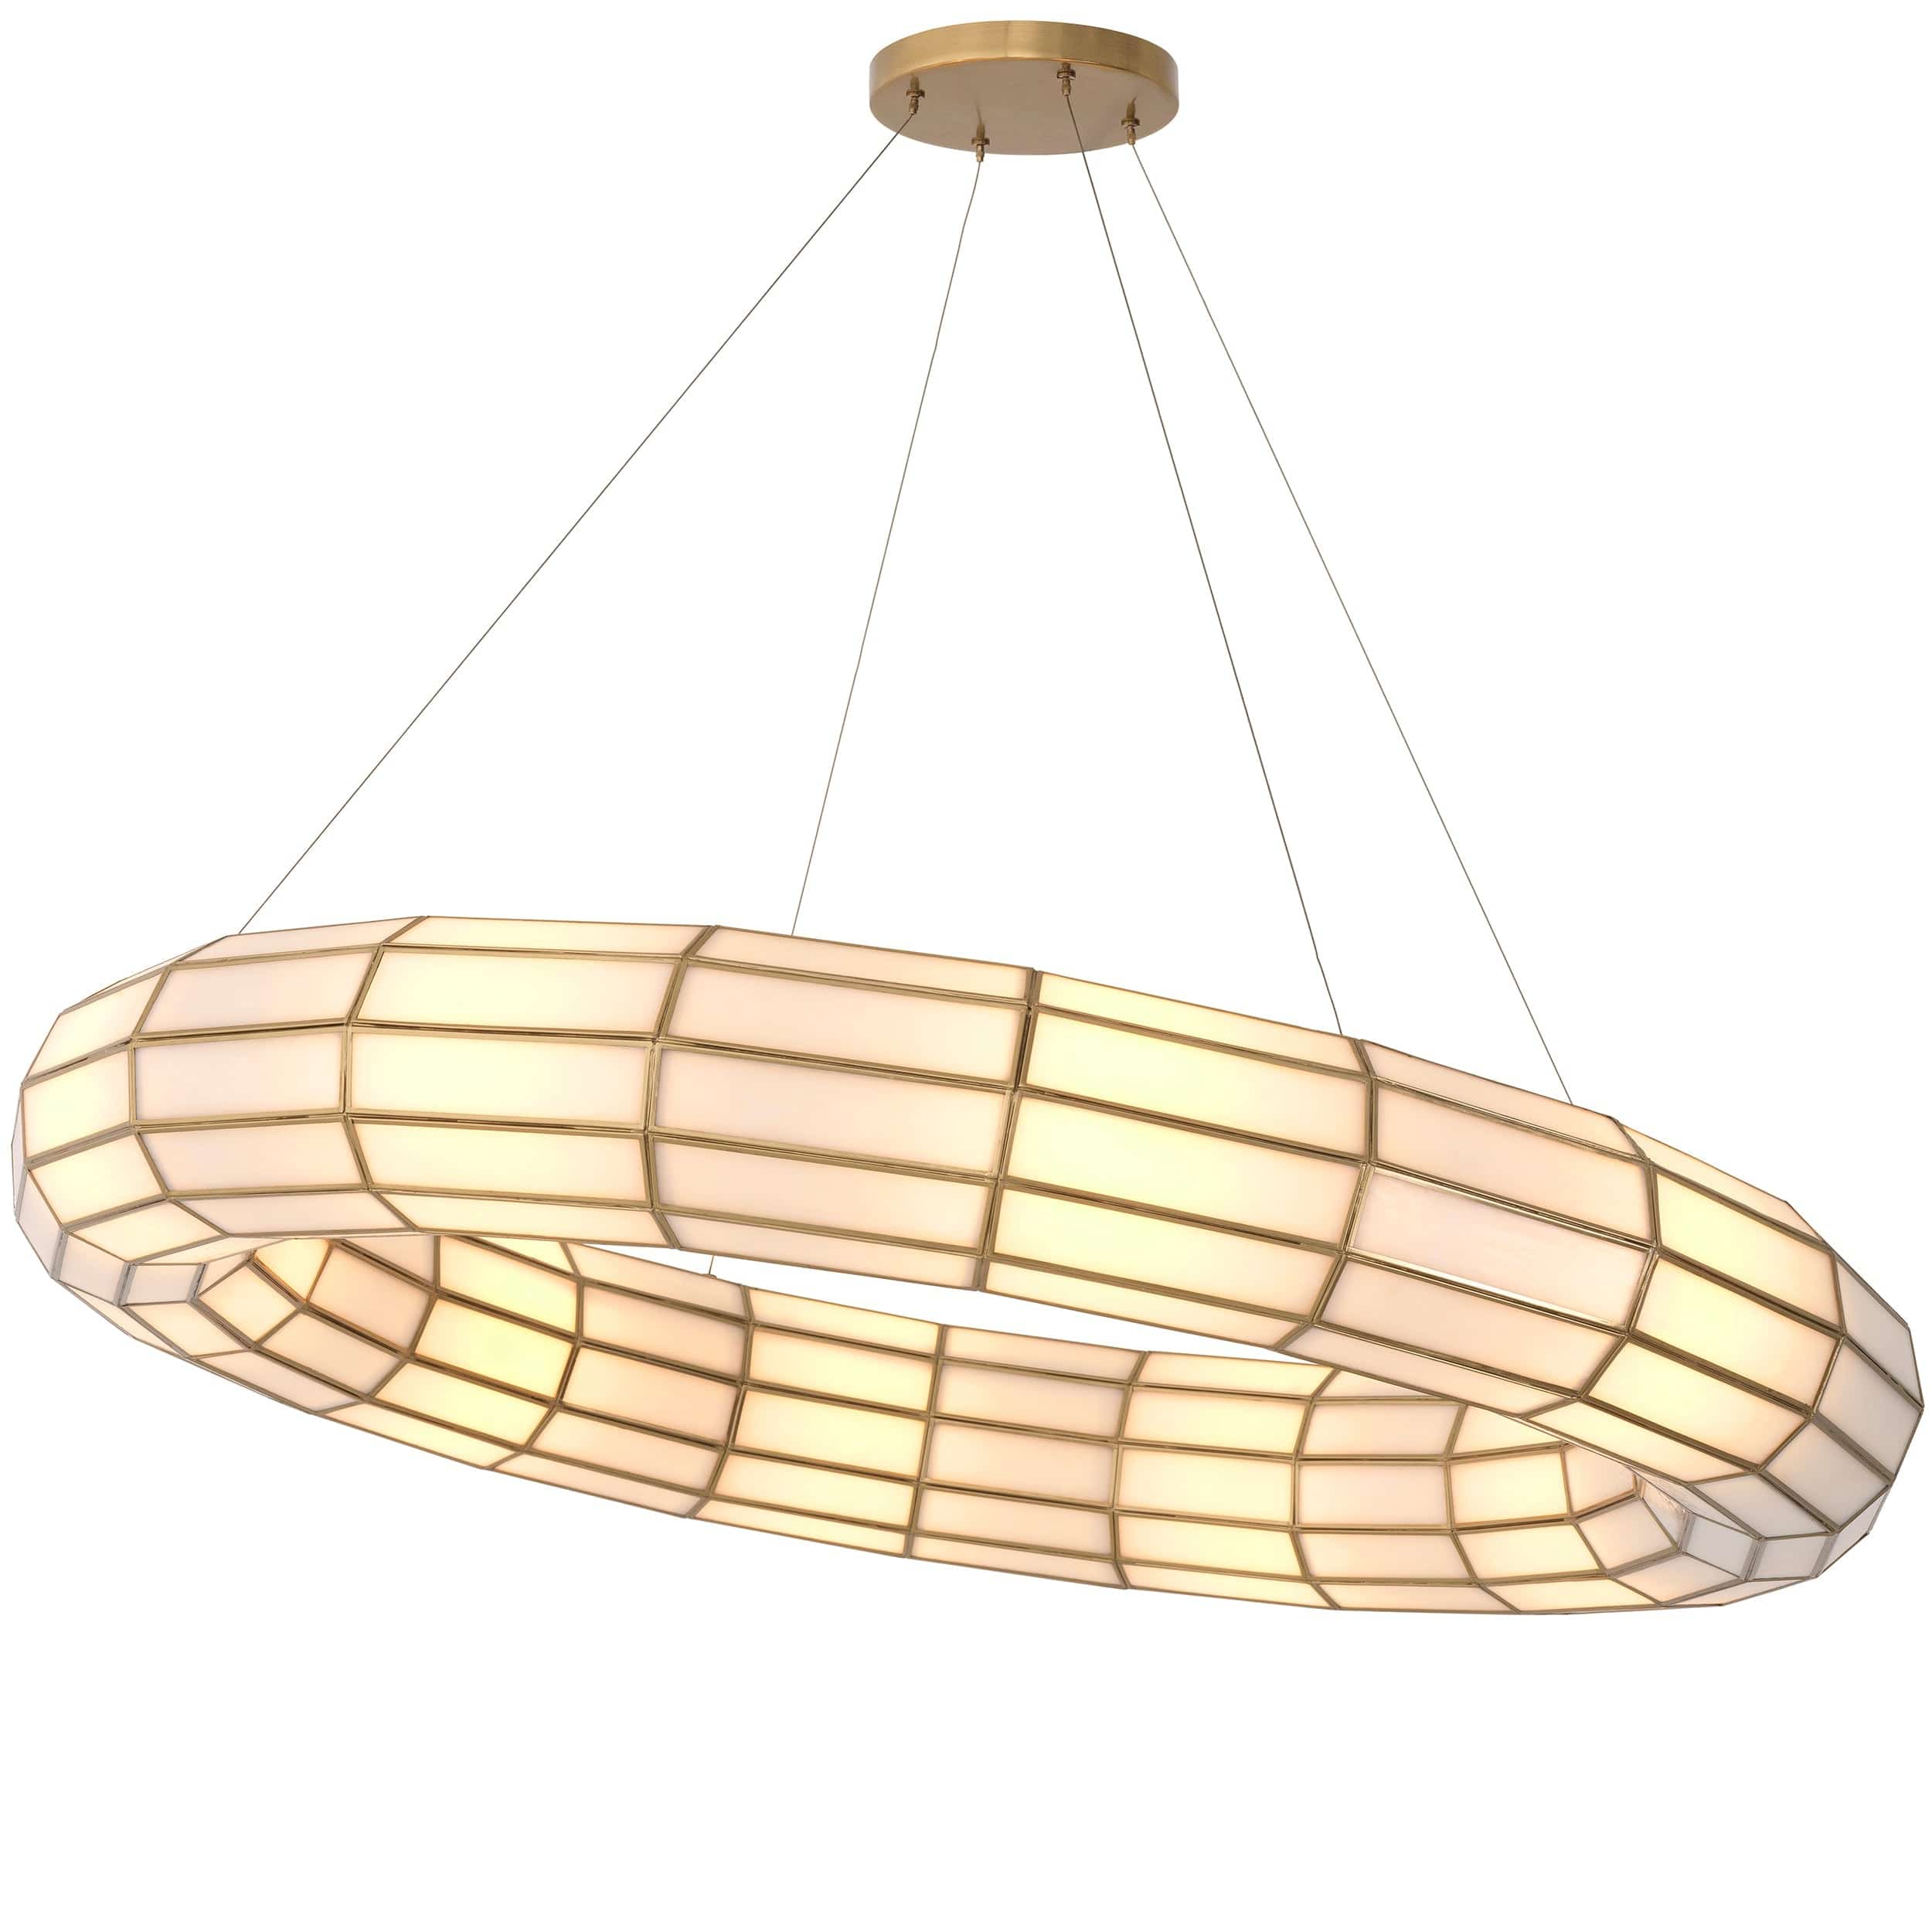 Ronco Chandelier - THAT COOL LIVING